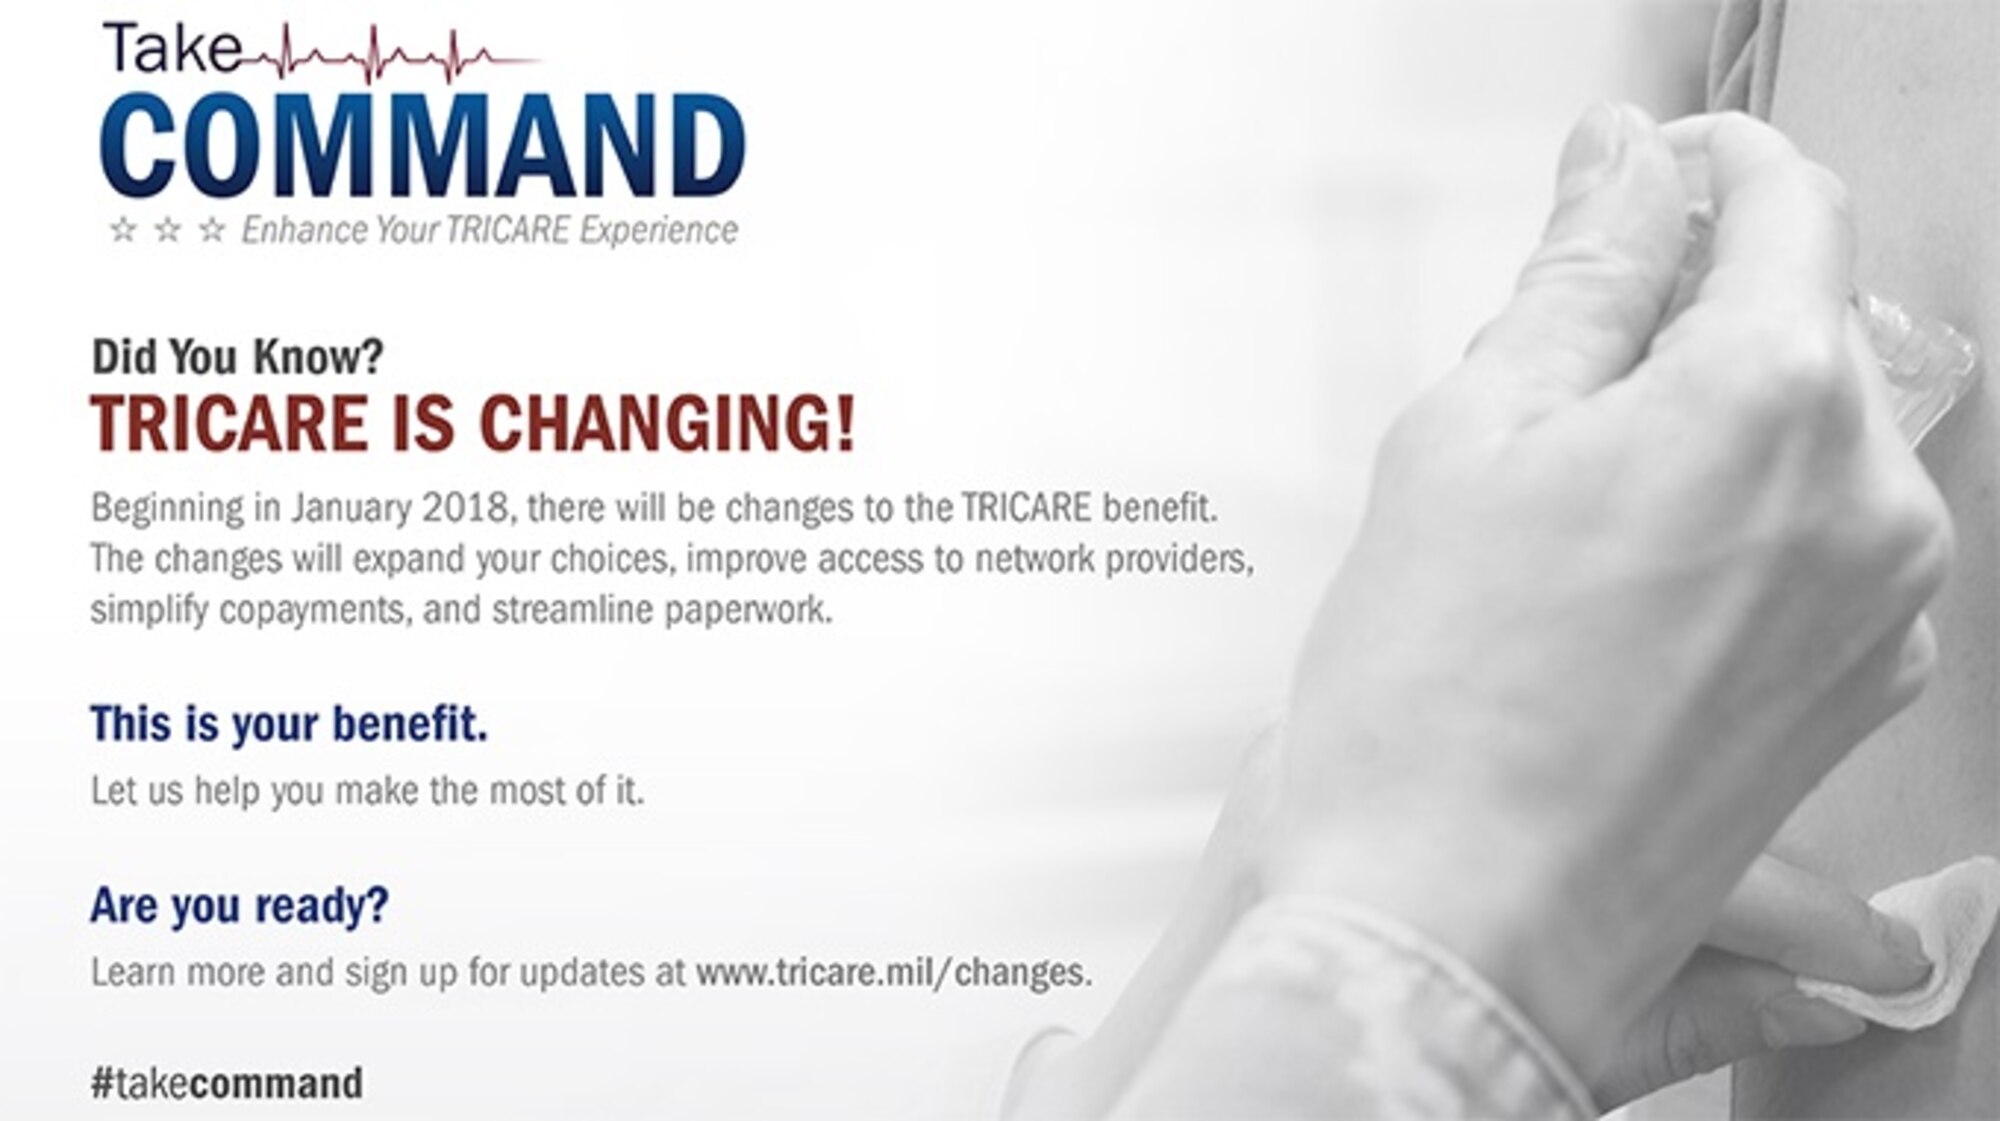 Beginning in January 2018, there will be changes to the TRICARE benefit. The changes will expand your choices, improve access to network providers, simplify copayments, and streamline paperwork.